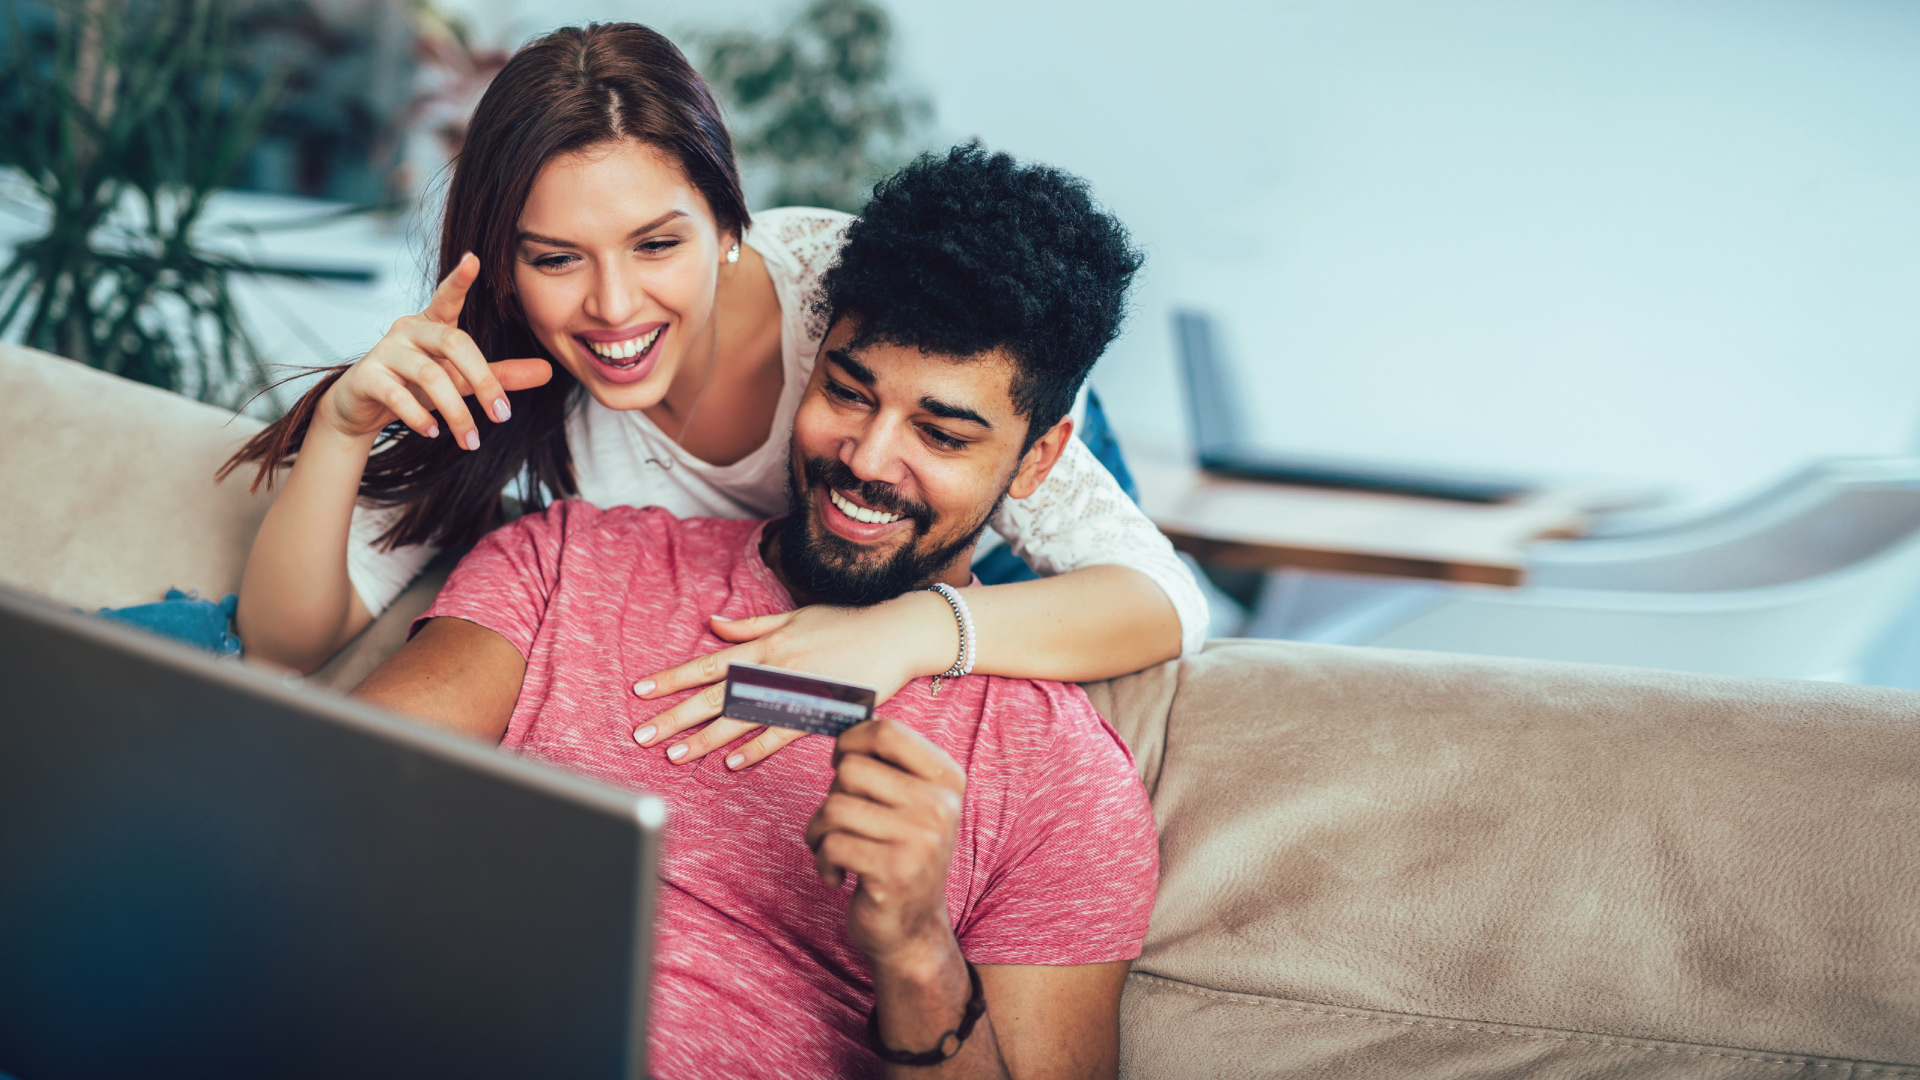 young adult couple sitting together on couch shopping online with laptop and debit card